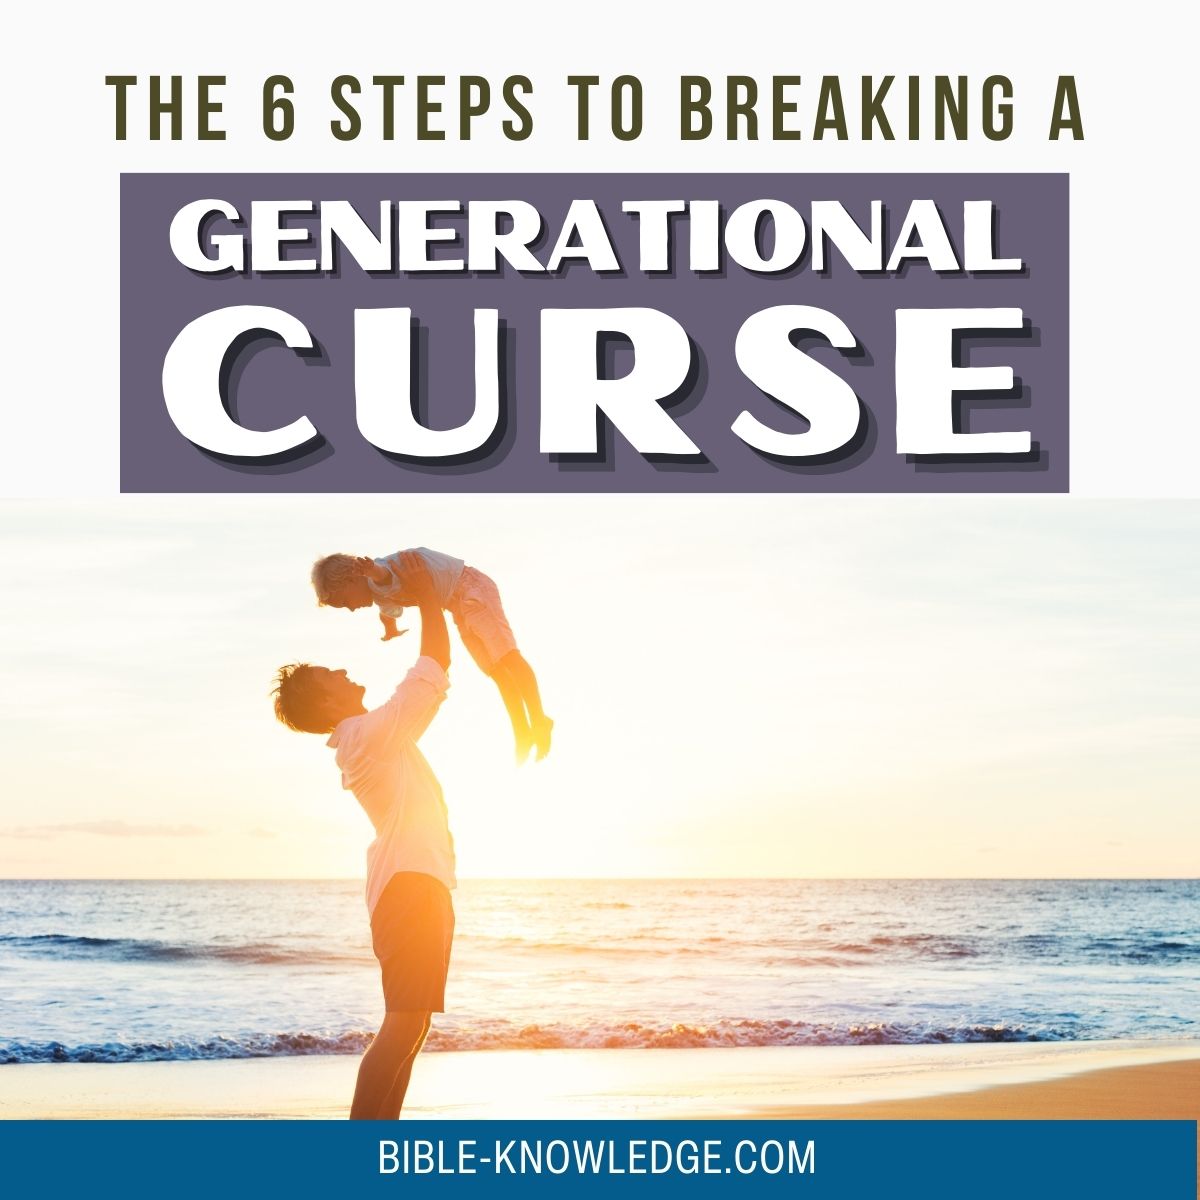 The 6 Steps To Breaking a Generational Curse